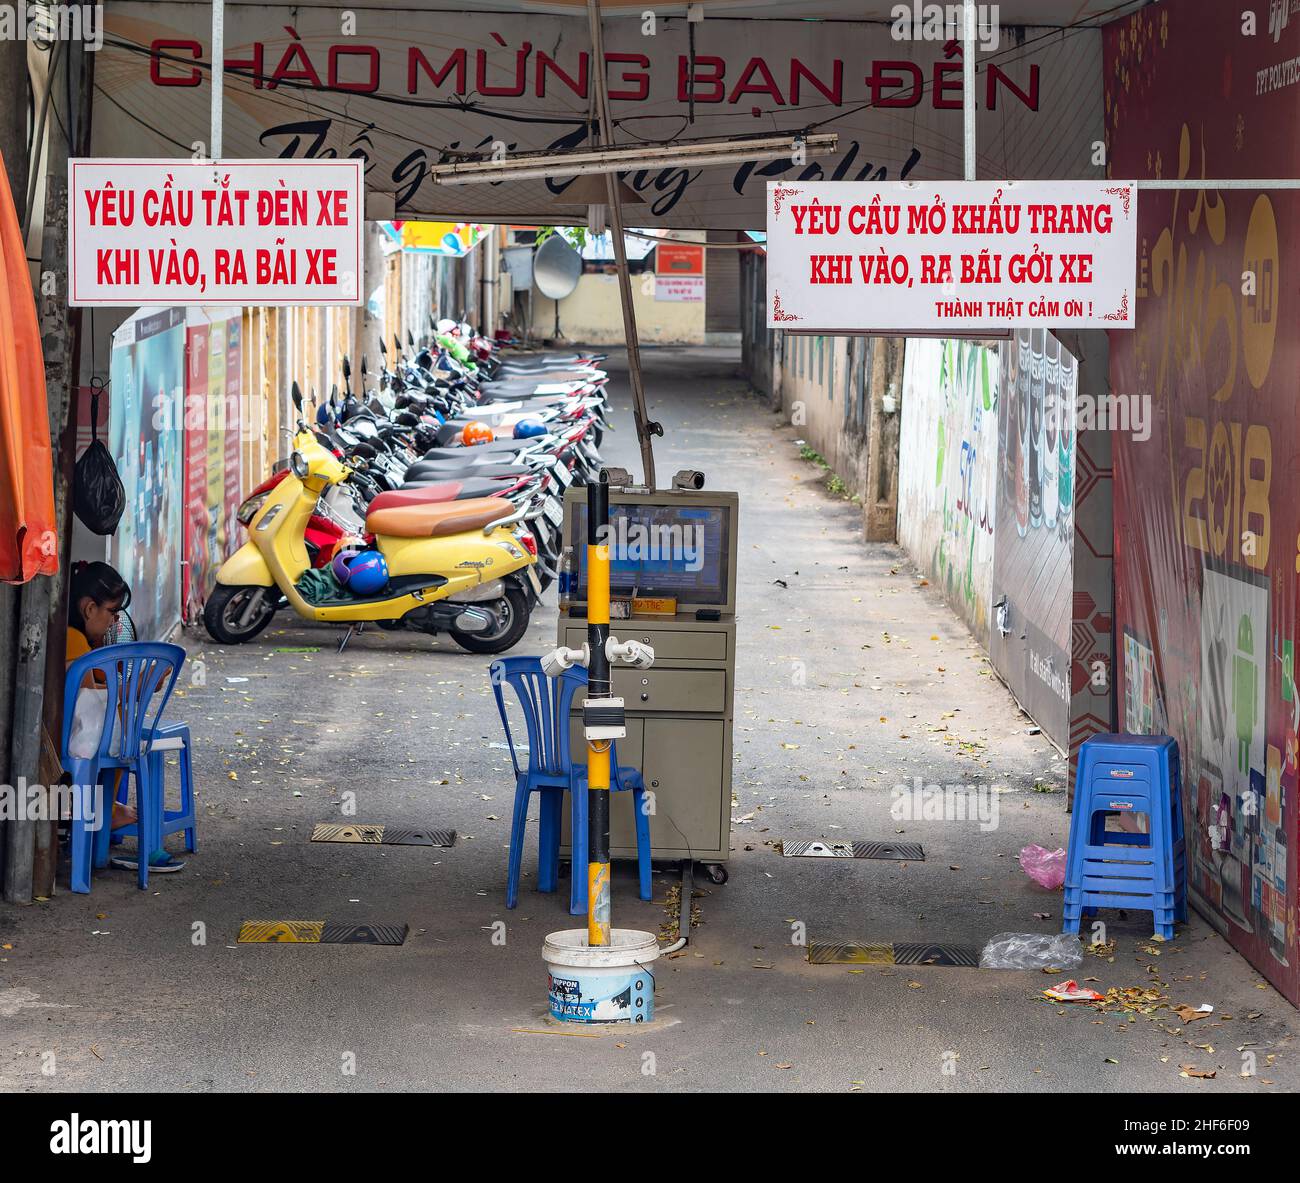 Motorbike parking in Ho Chi Minh City, Vietnam. Ho Chi Minh City has countless motorbike parkings at backyards and indoor, where for a small fee peopl Stock Photo